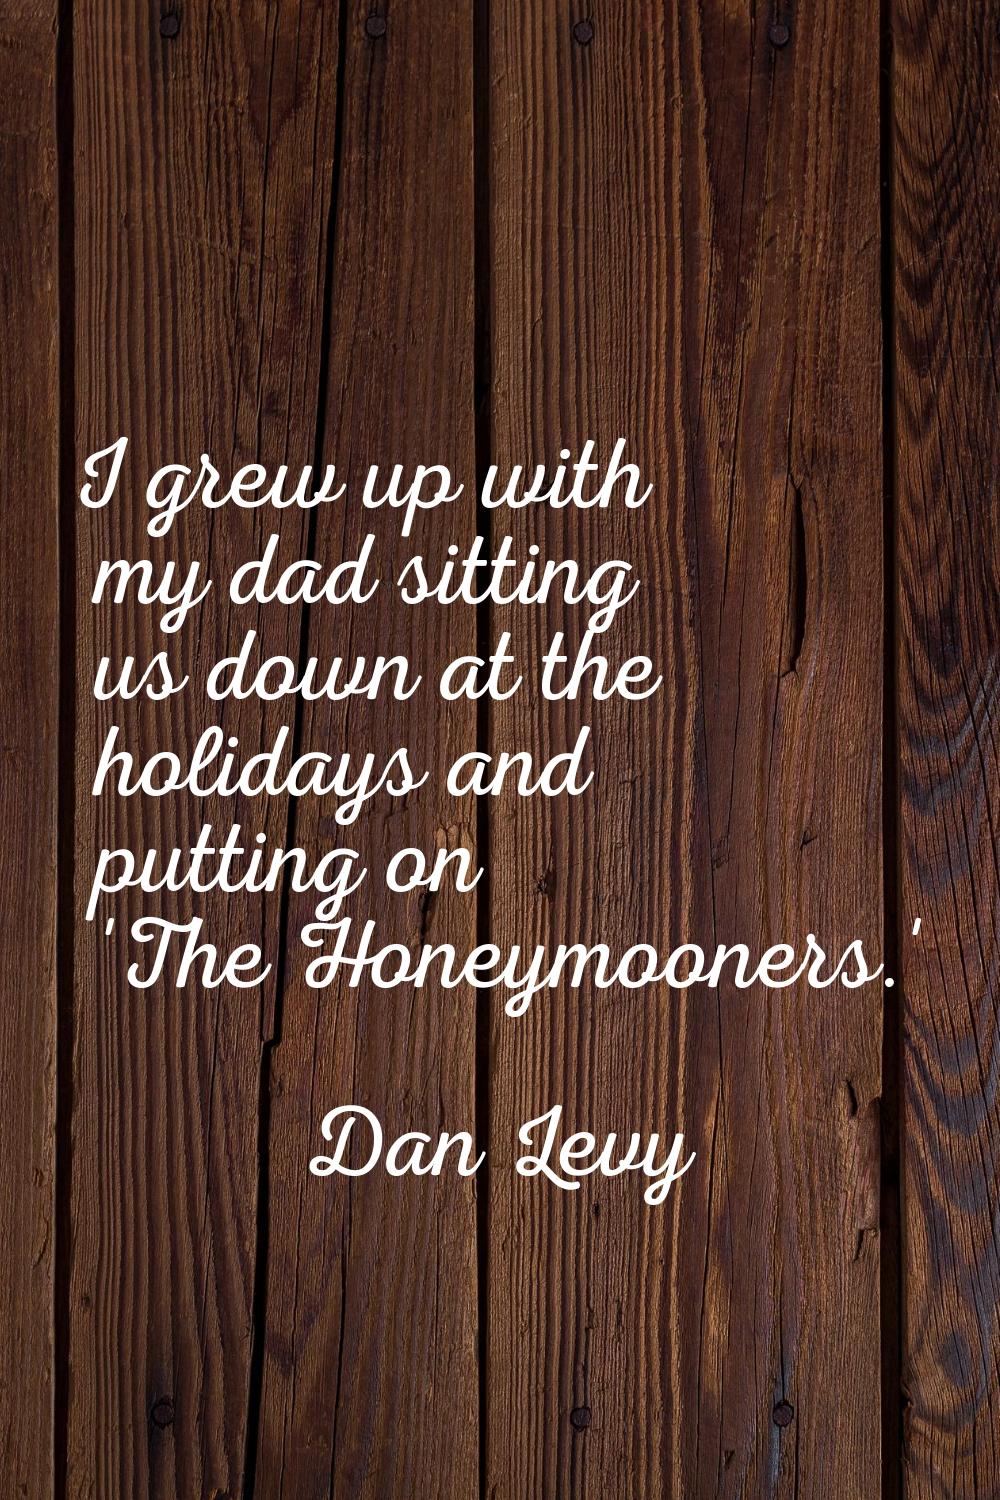 I grew up with my dad sitting us down at the holidays and putting on 'The Honeymooners.'